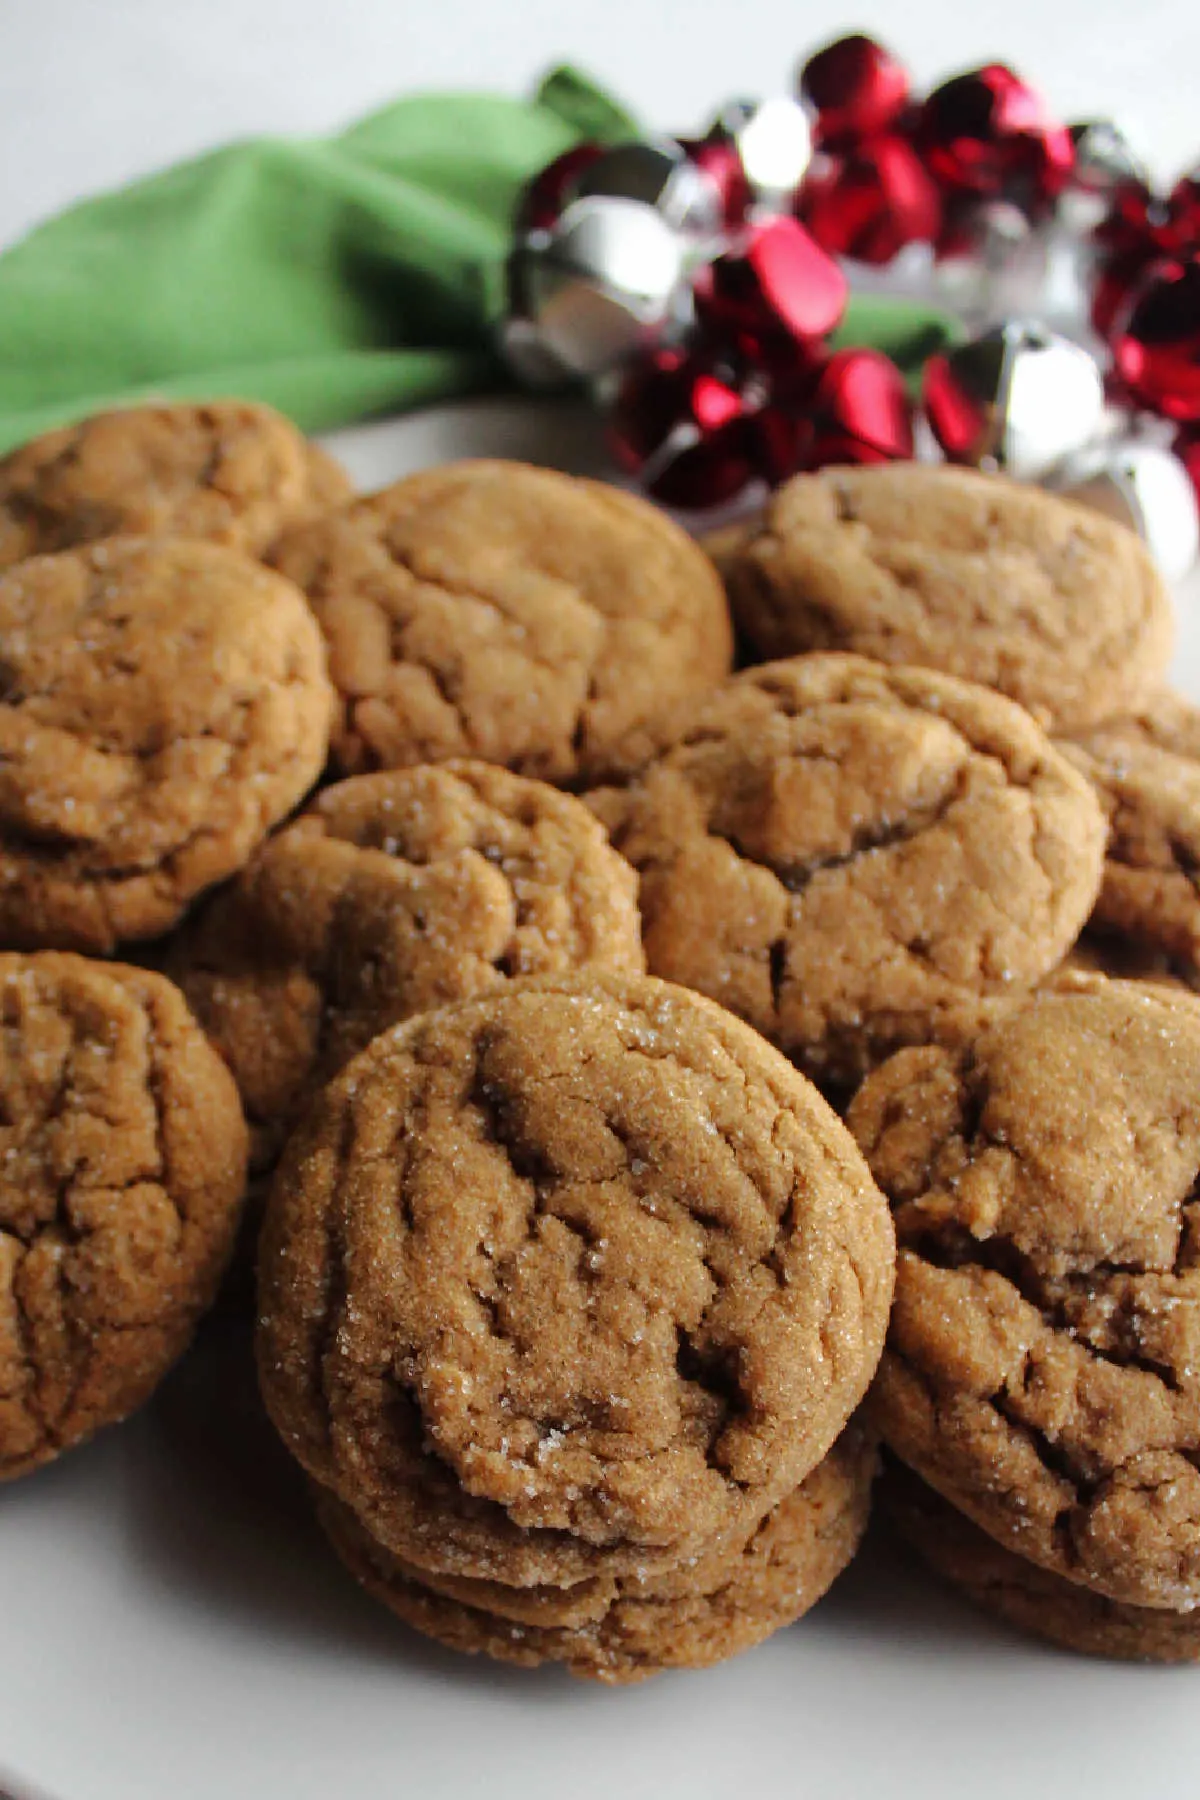 Plate of sugar coated crinkled molasses cookies ready to be served.